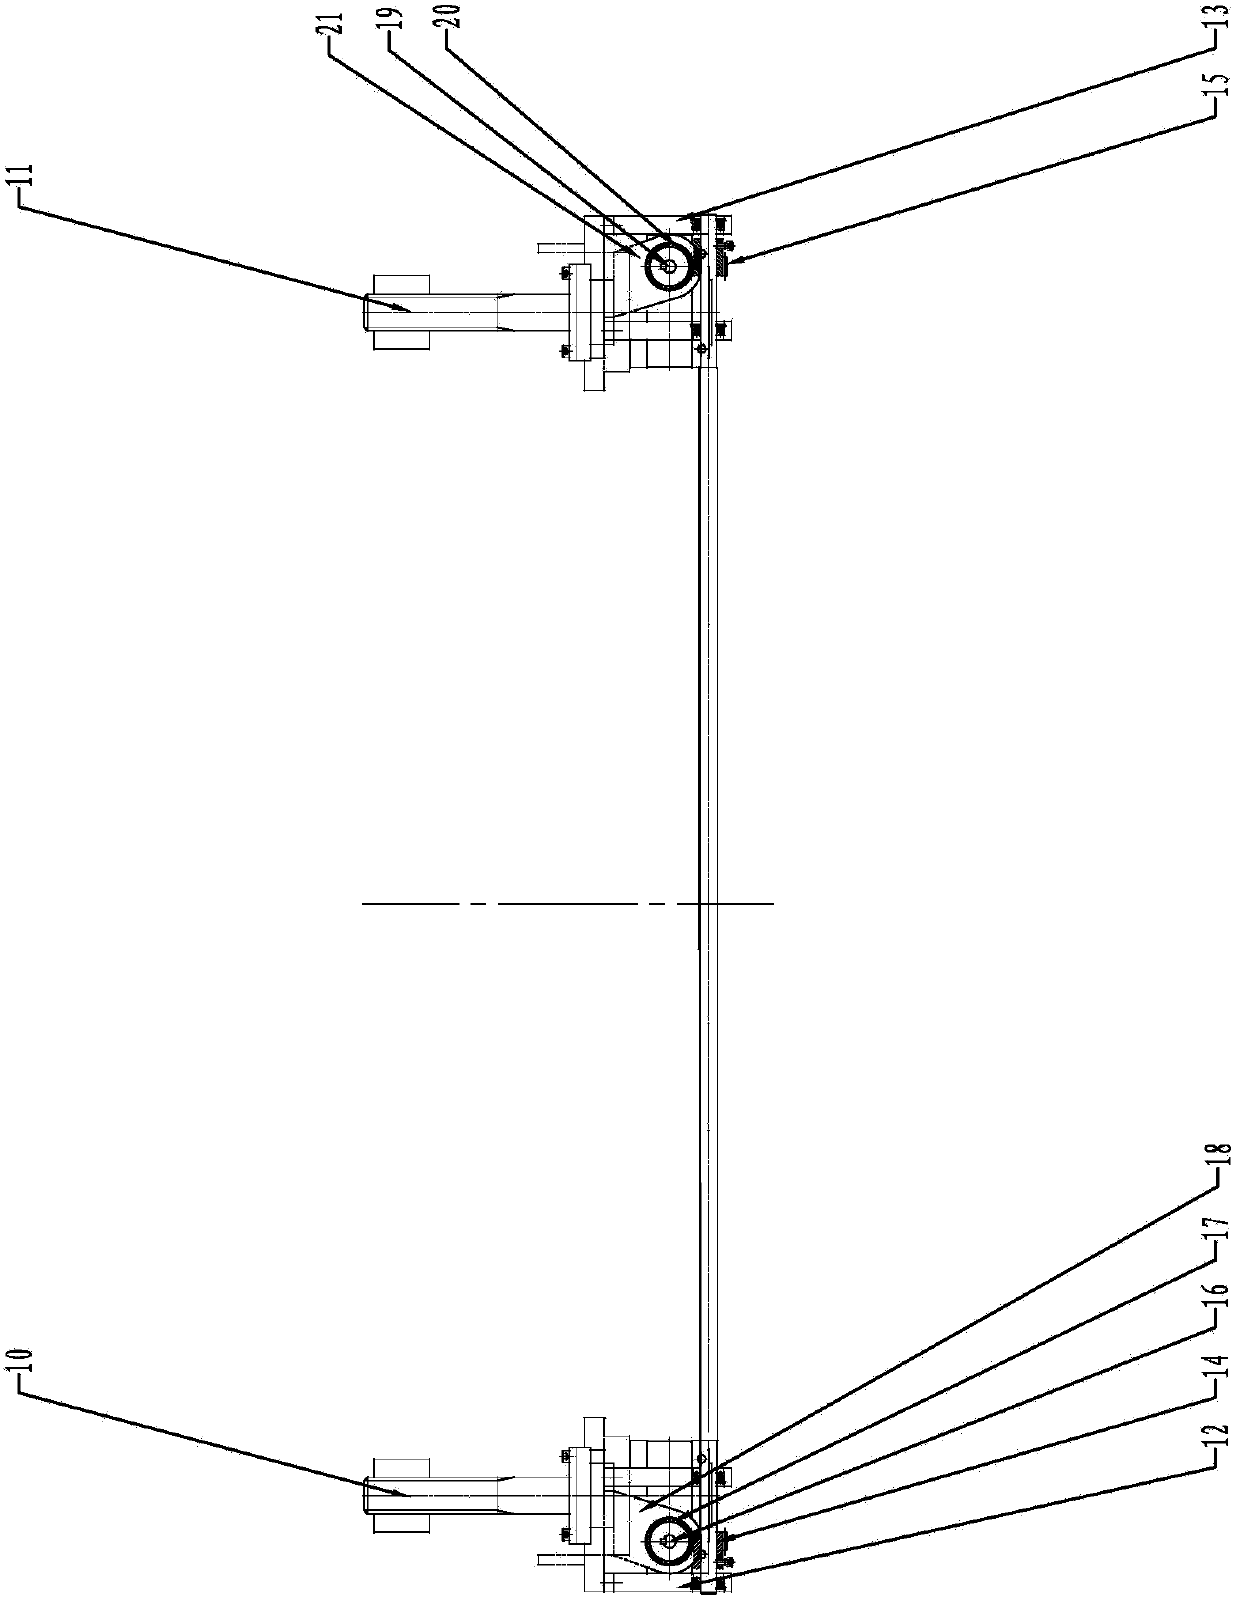 Synchronously-ejecting welding mechanism for lower welding of steel bar trusses